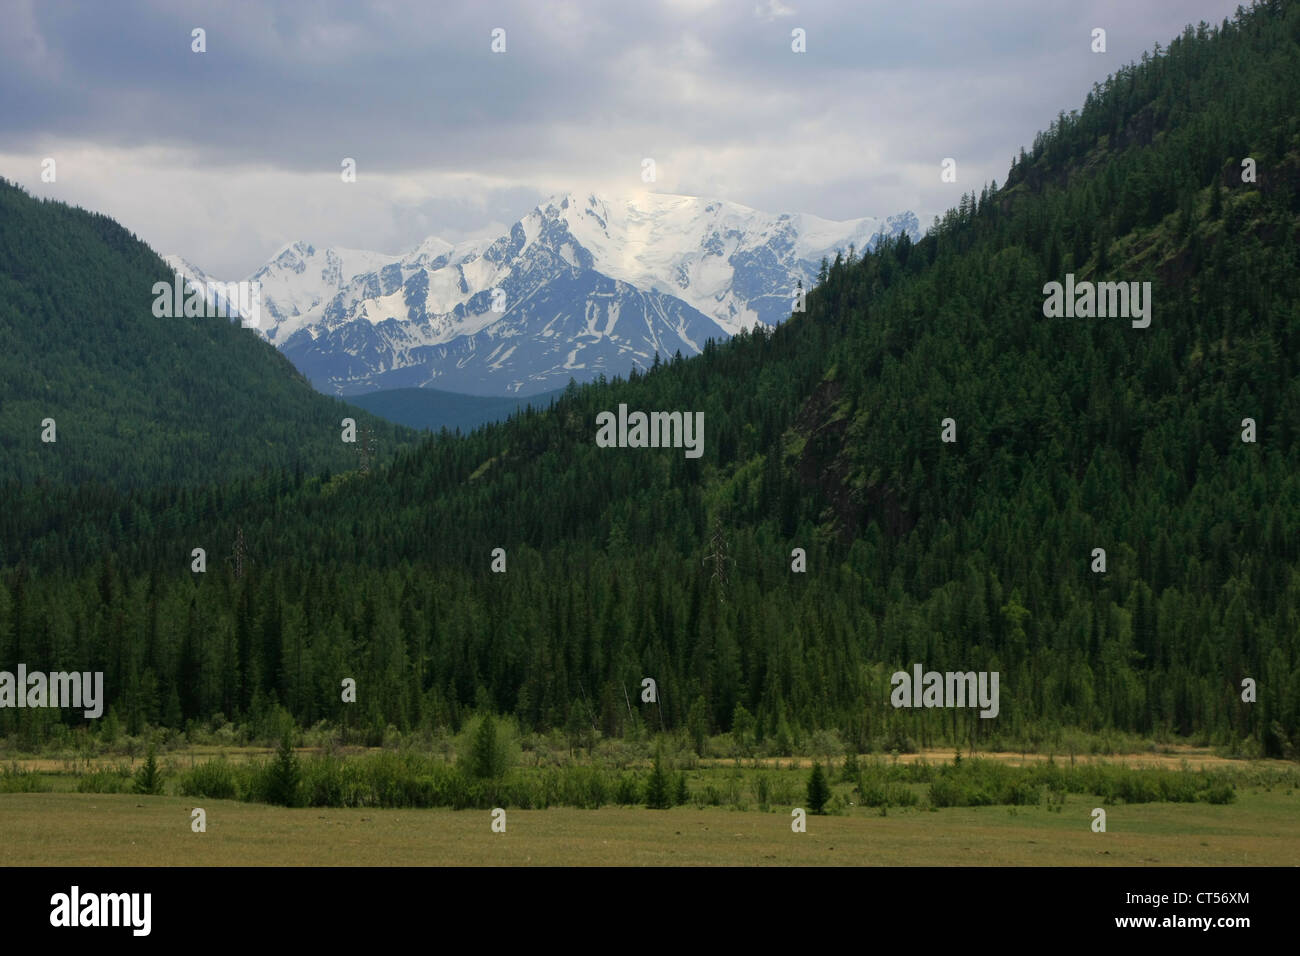 Snowcapped mountains and pine forest, Altai, Siberia, Russia Stock Photo